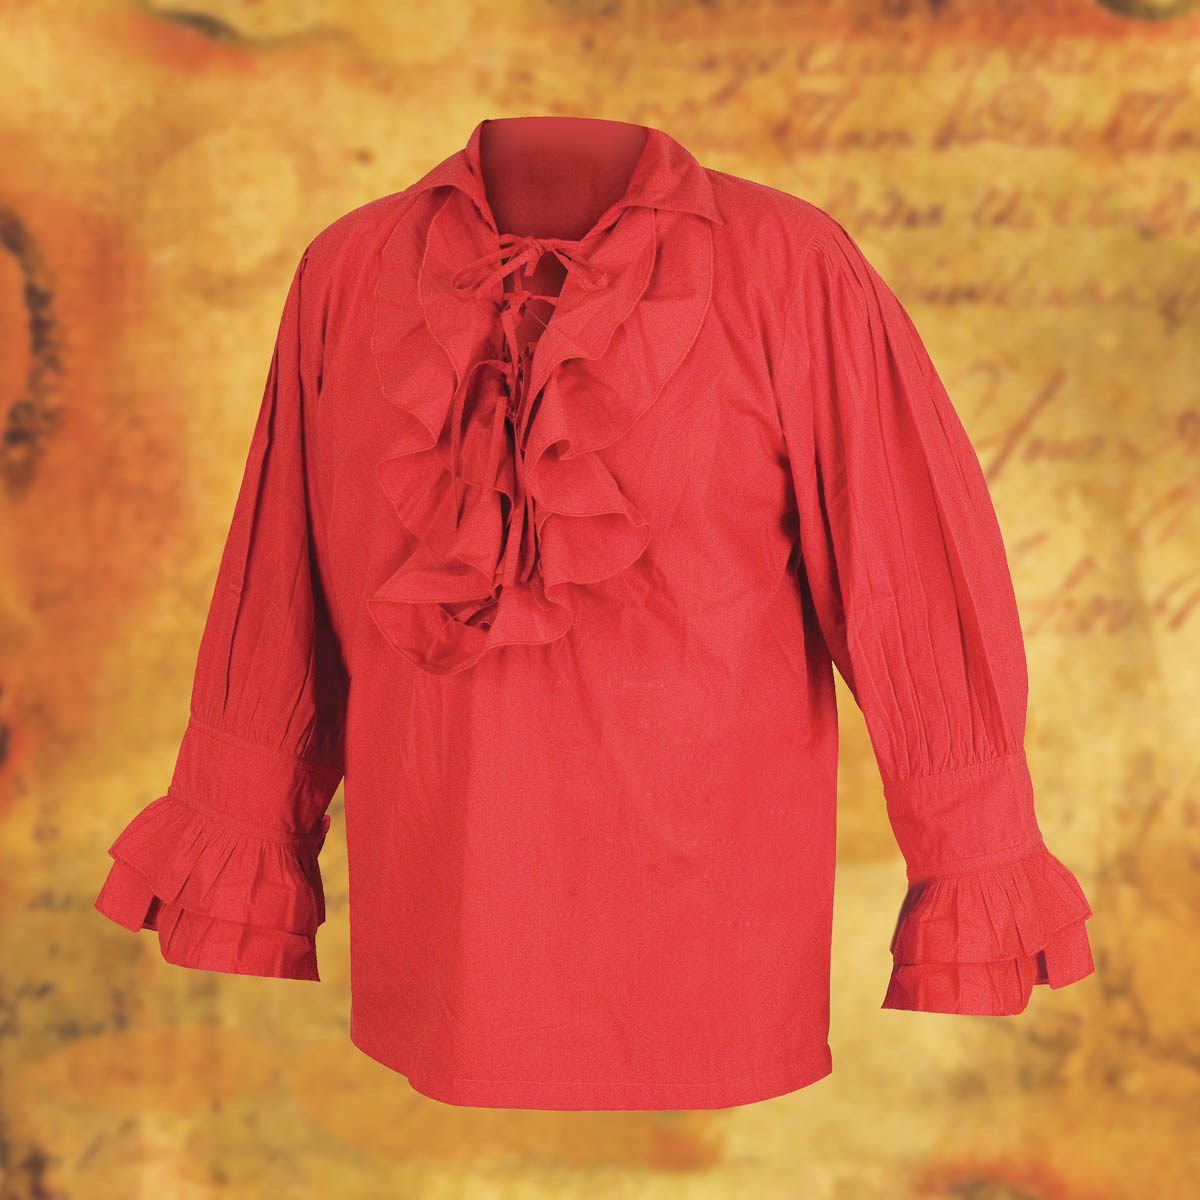 Red Tortuga ruffle front pirate shirt with 6 lace-up ties, gathered shoulders and 2 lace-up ties at the ruffled cuff wrists